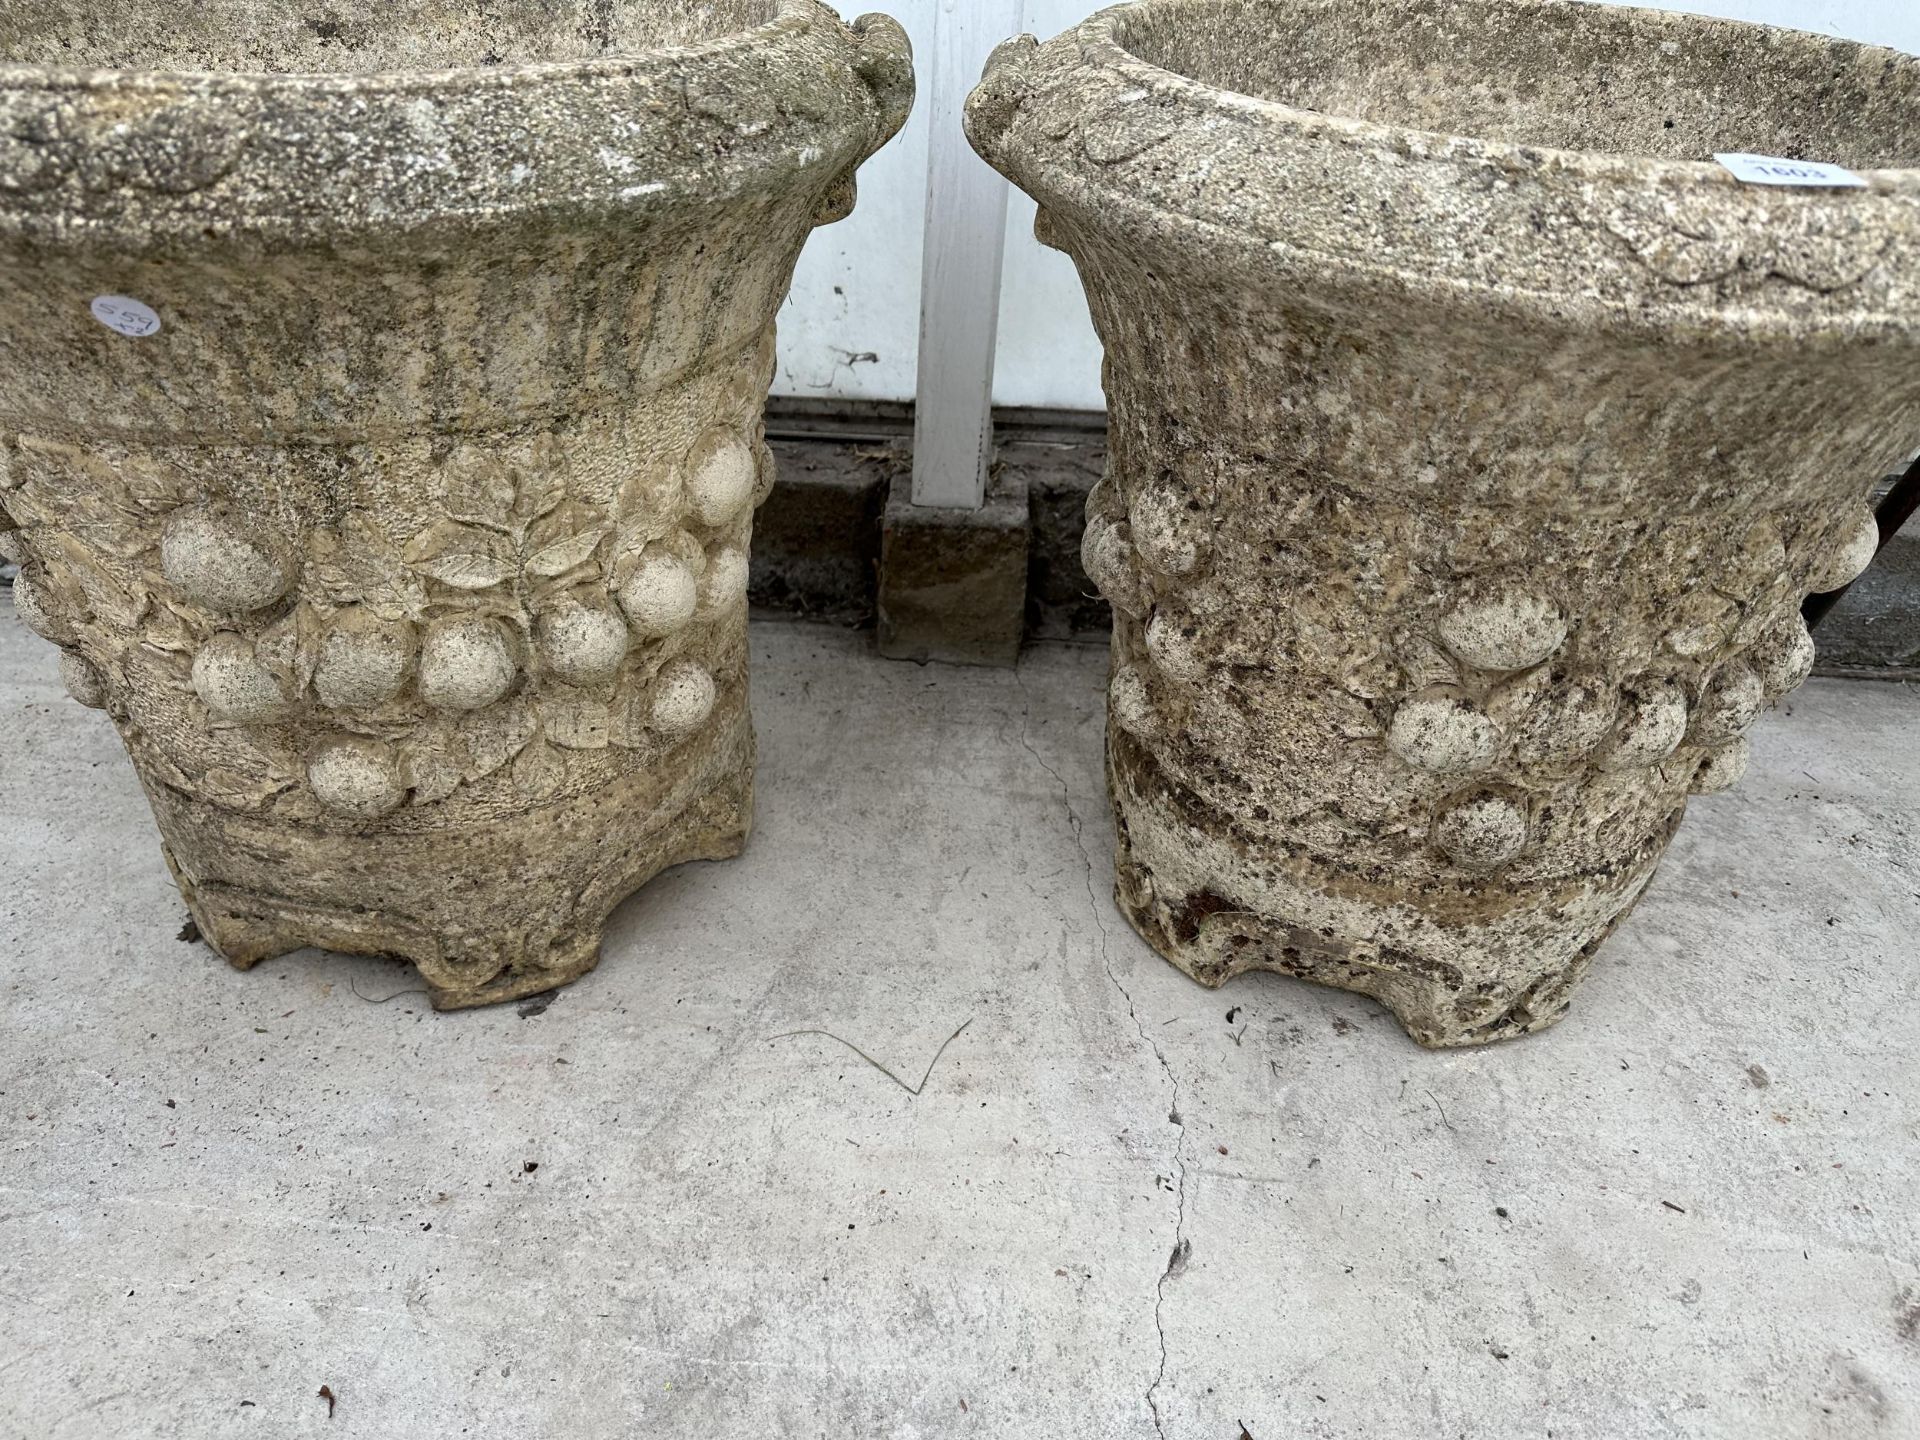 A PAIR OF LARGE DECORATIVE RECONSTITUTED STONE GARDEN PLANT POTS - Image 3 of 3